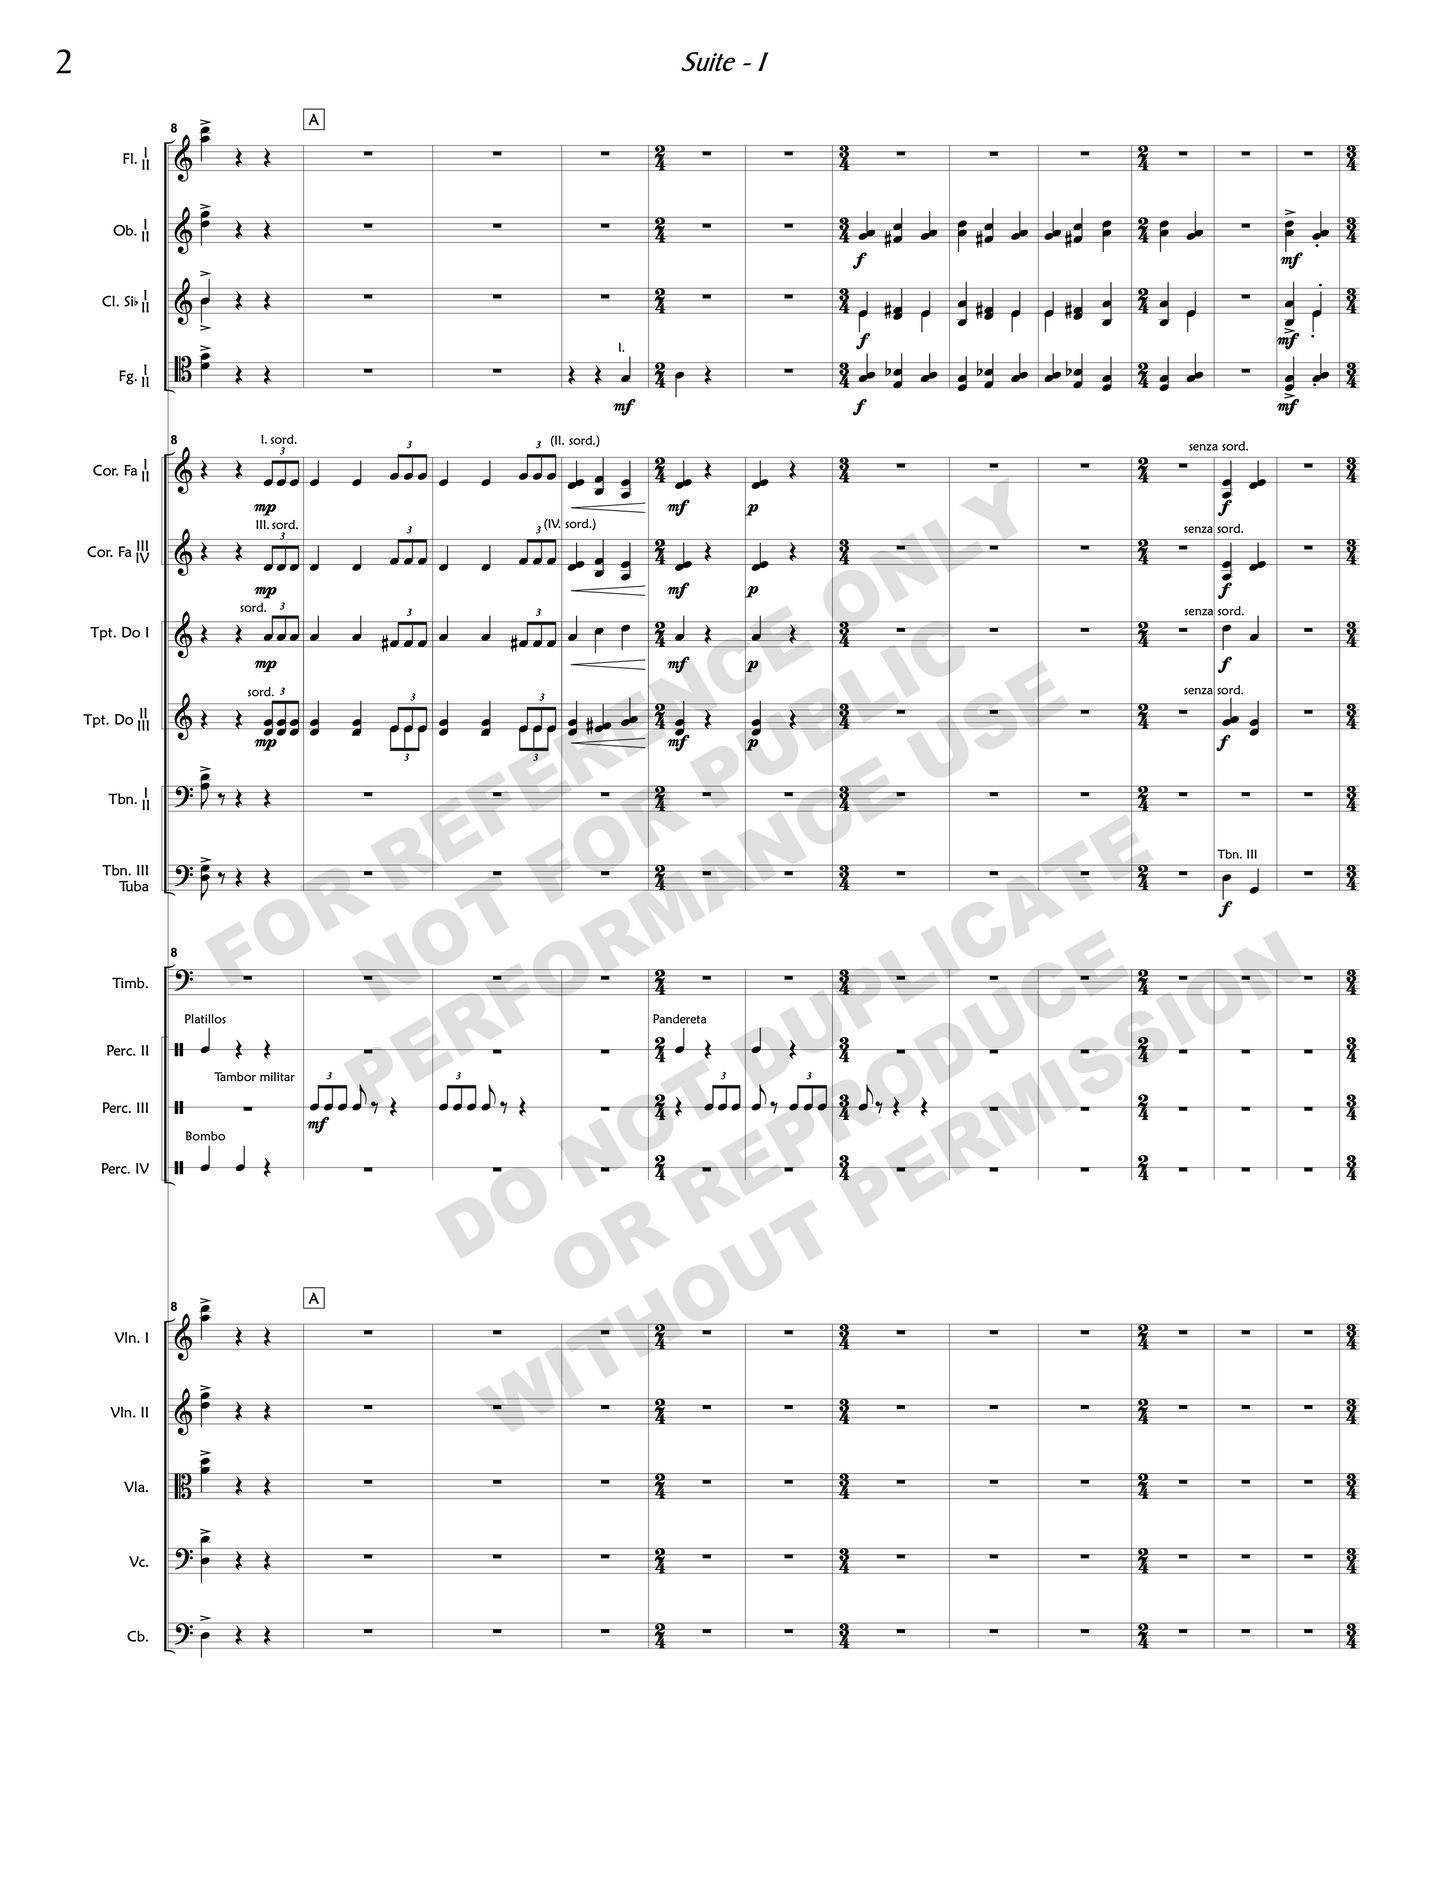 Suite, for orchestra